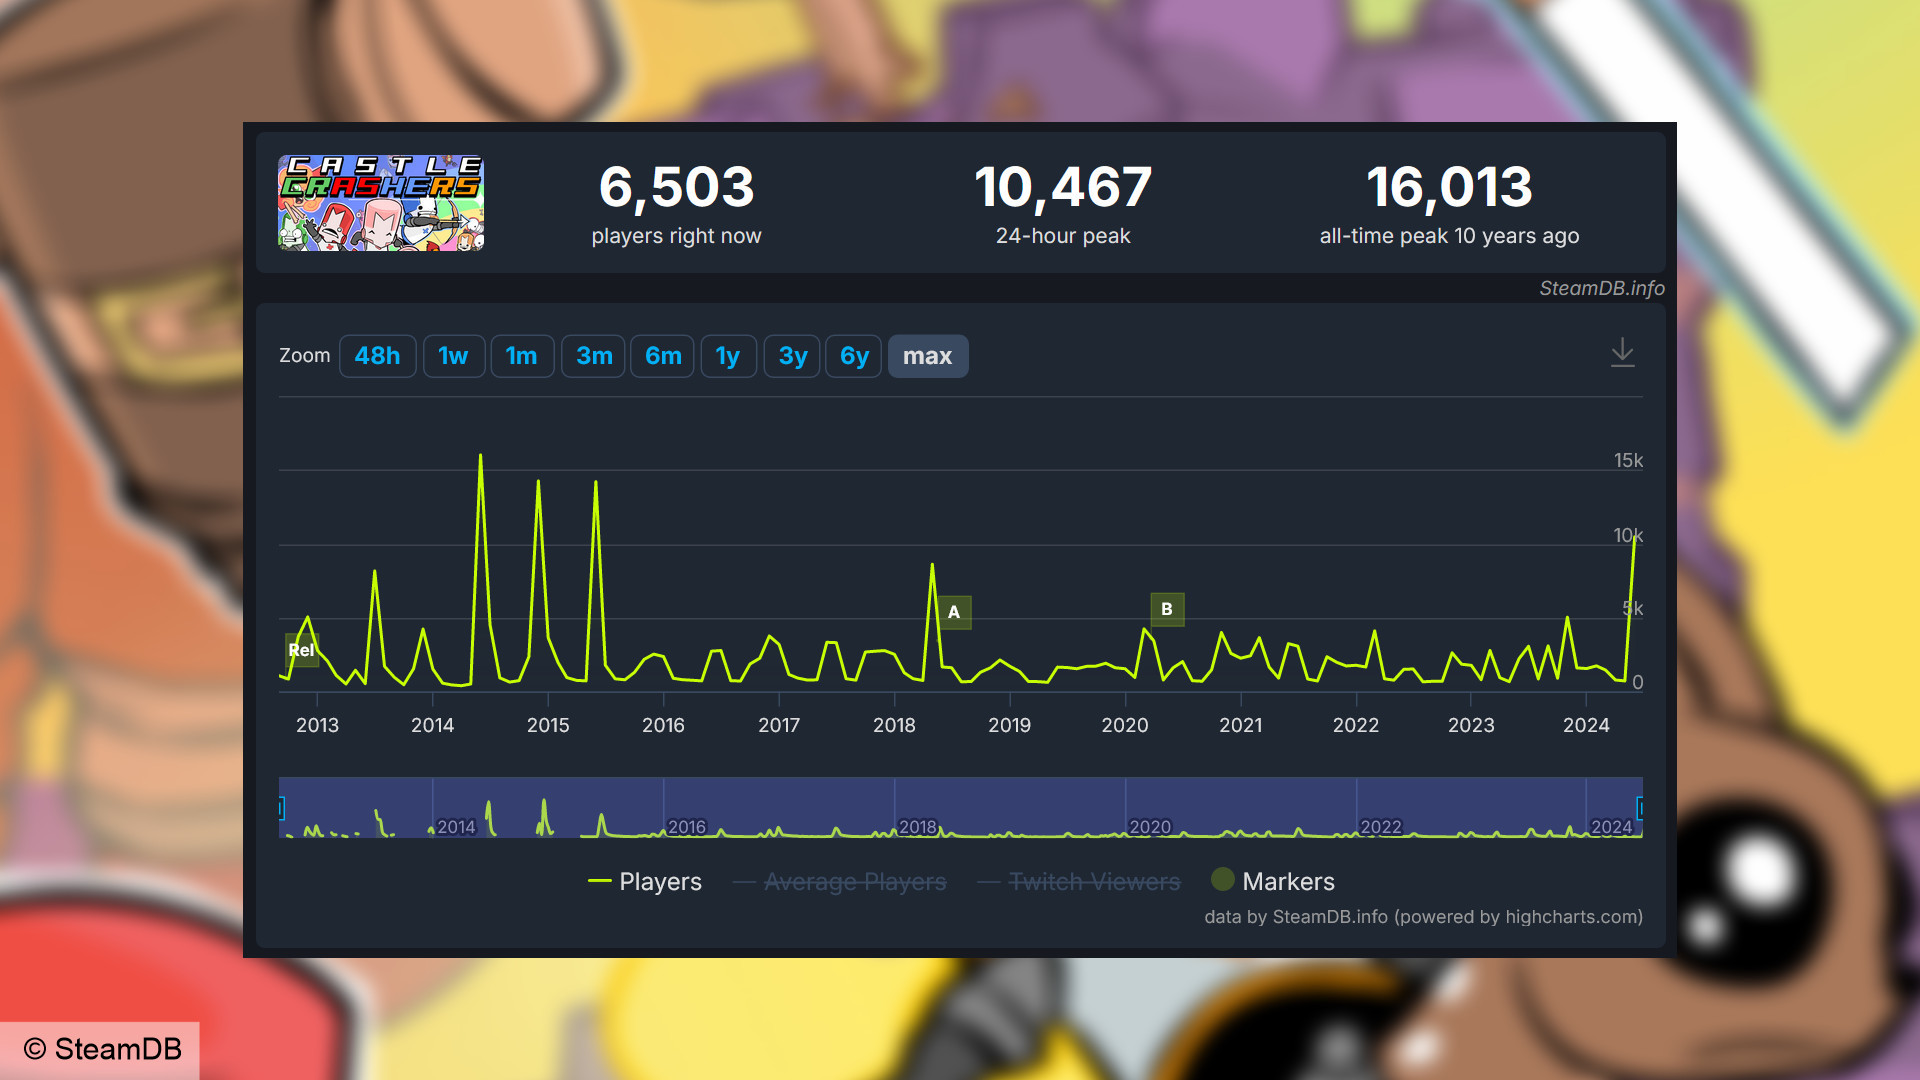 Castle Crashers Steam player count - SteamDB chart showing a 24-hour peak of 10,467 players.